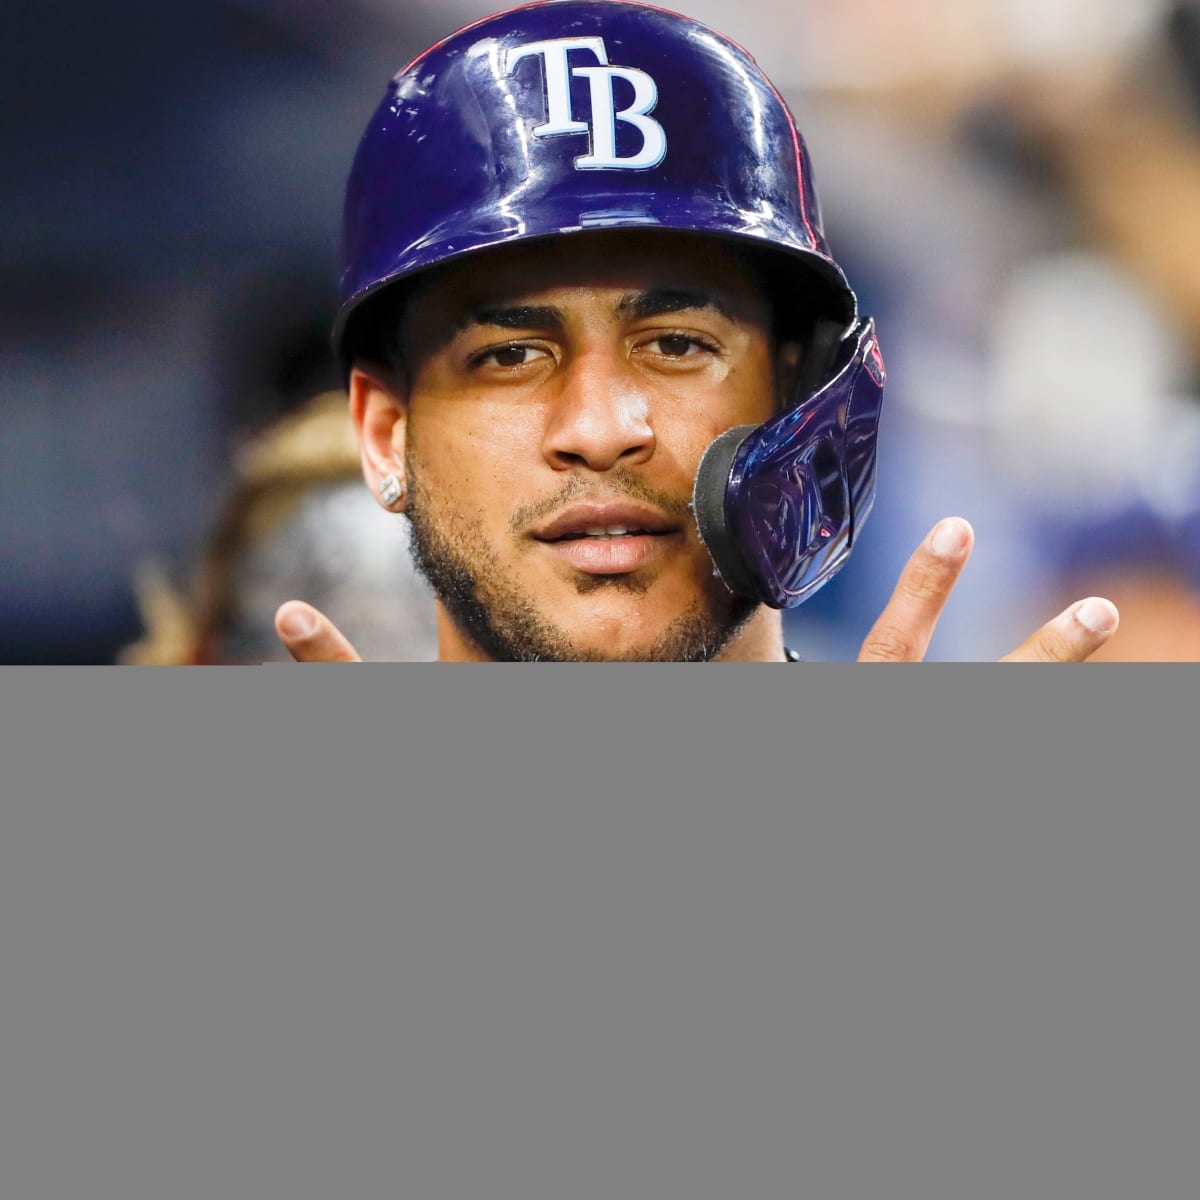 Rays playoff odds surge as pitching, role players lead the charge